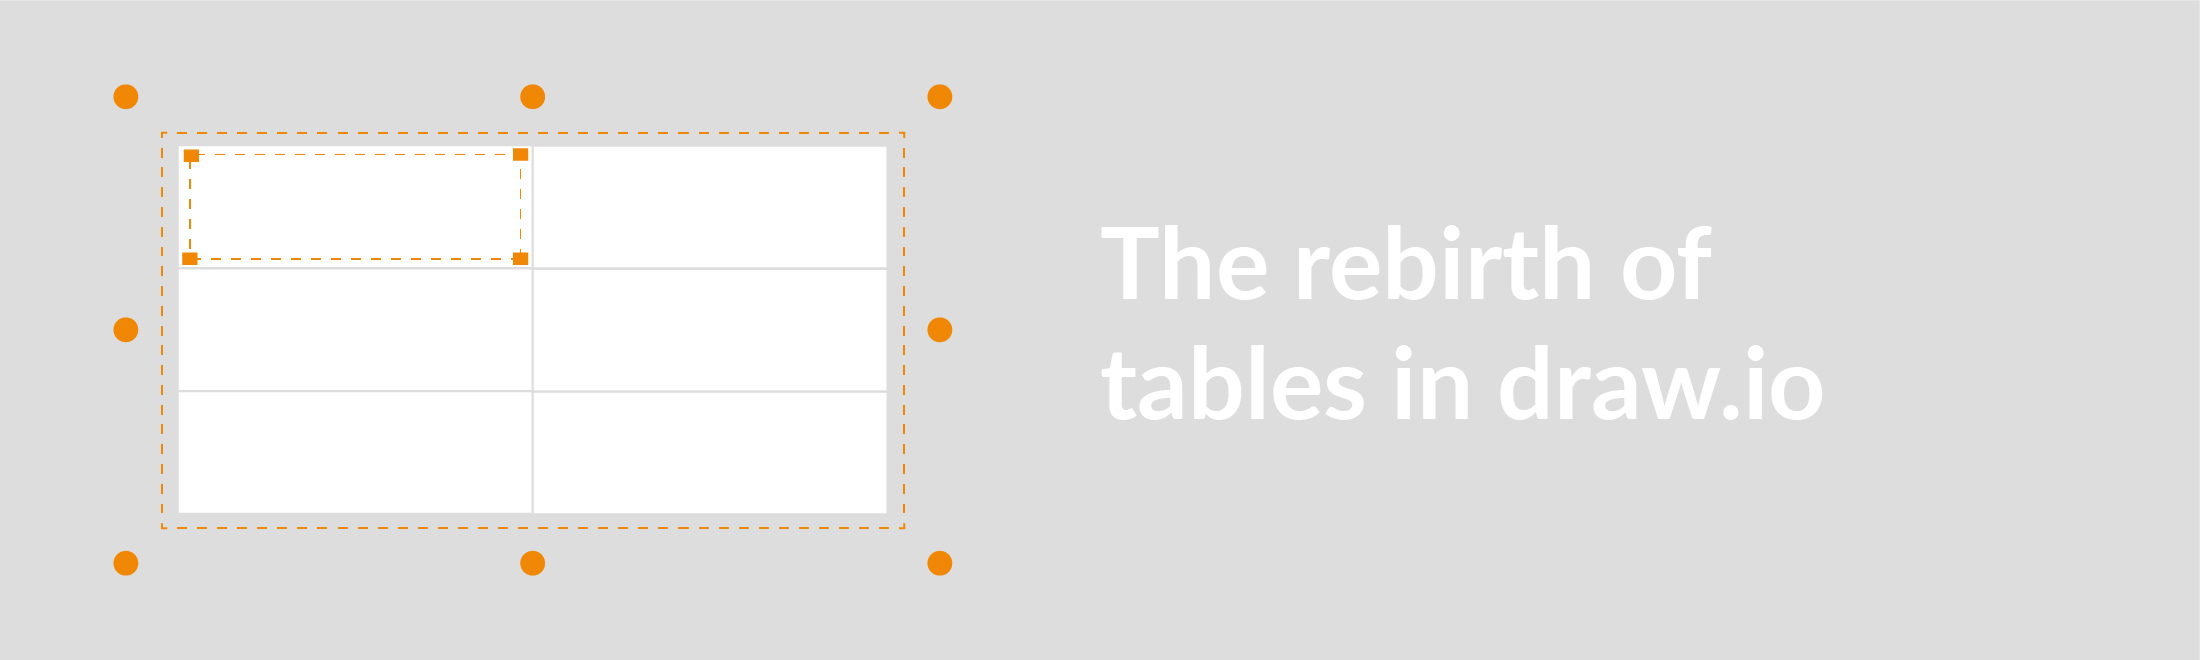 Tables in draw.io got a makeover